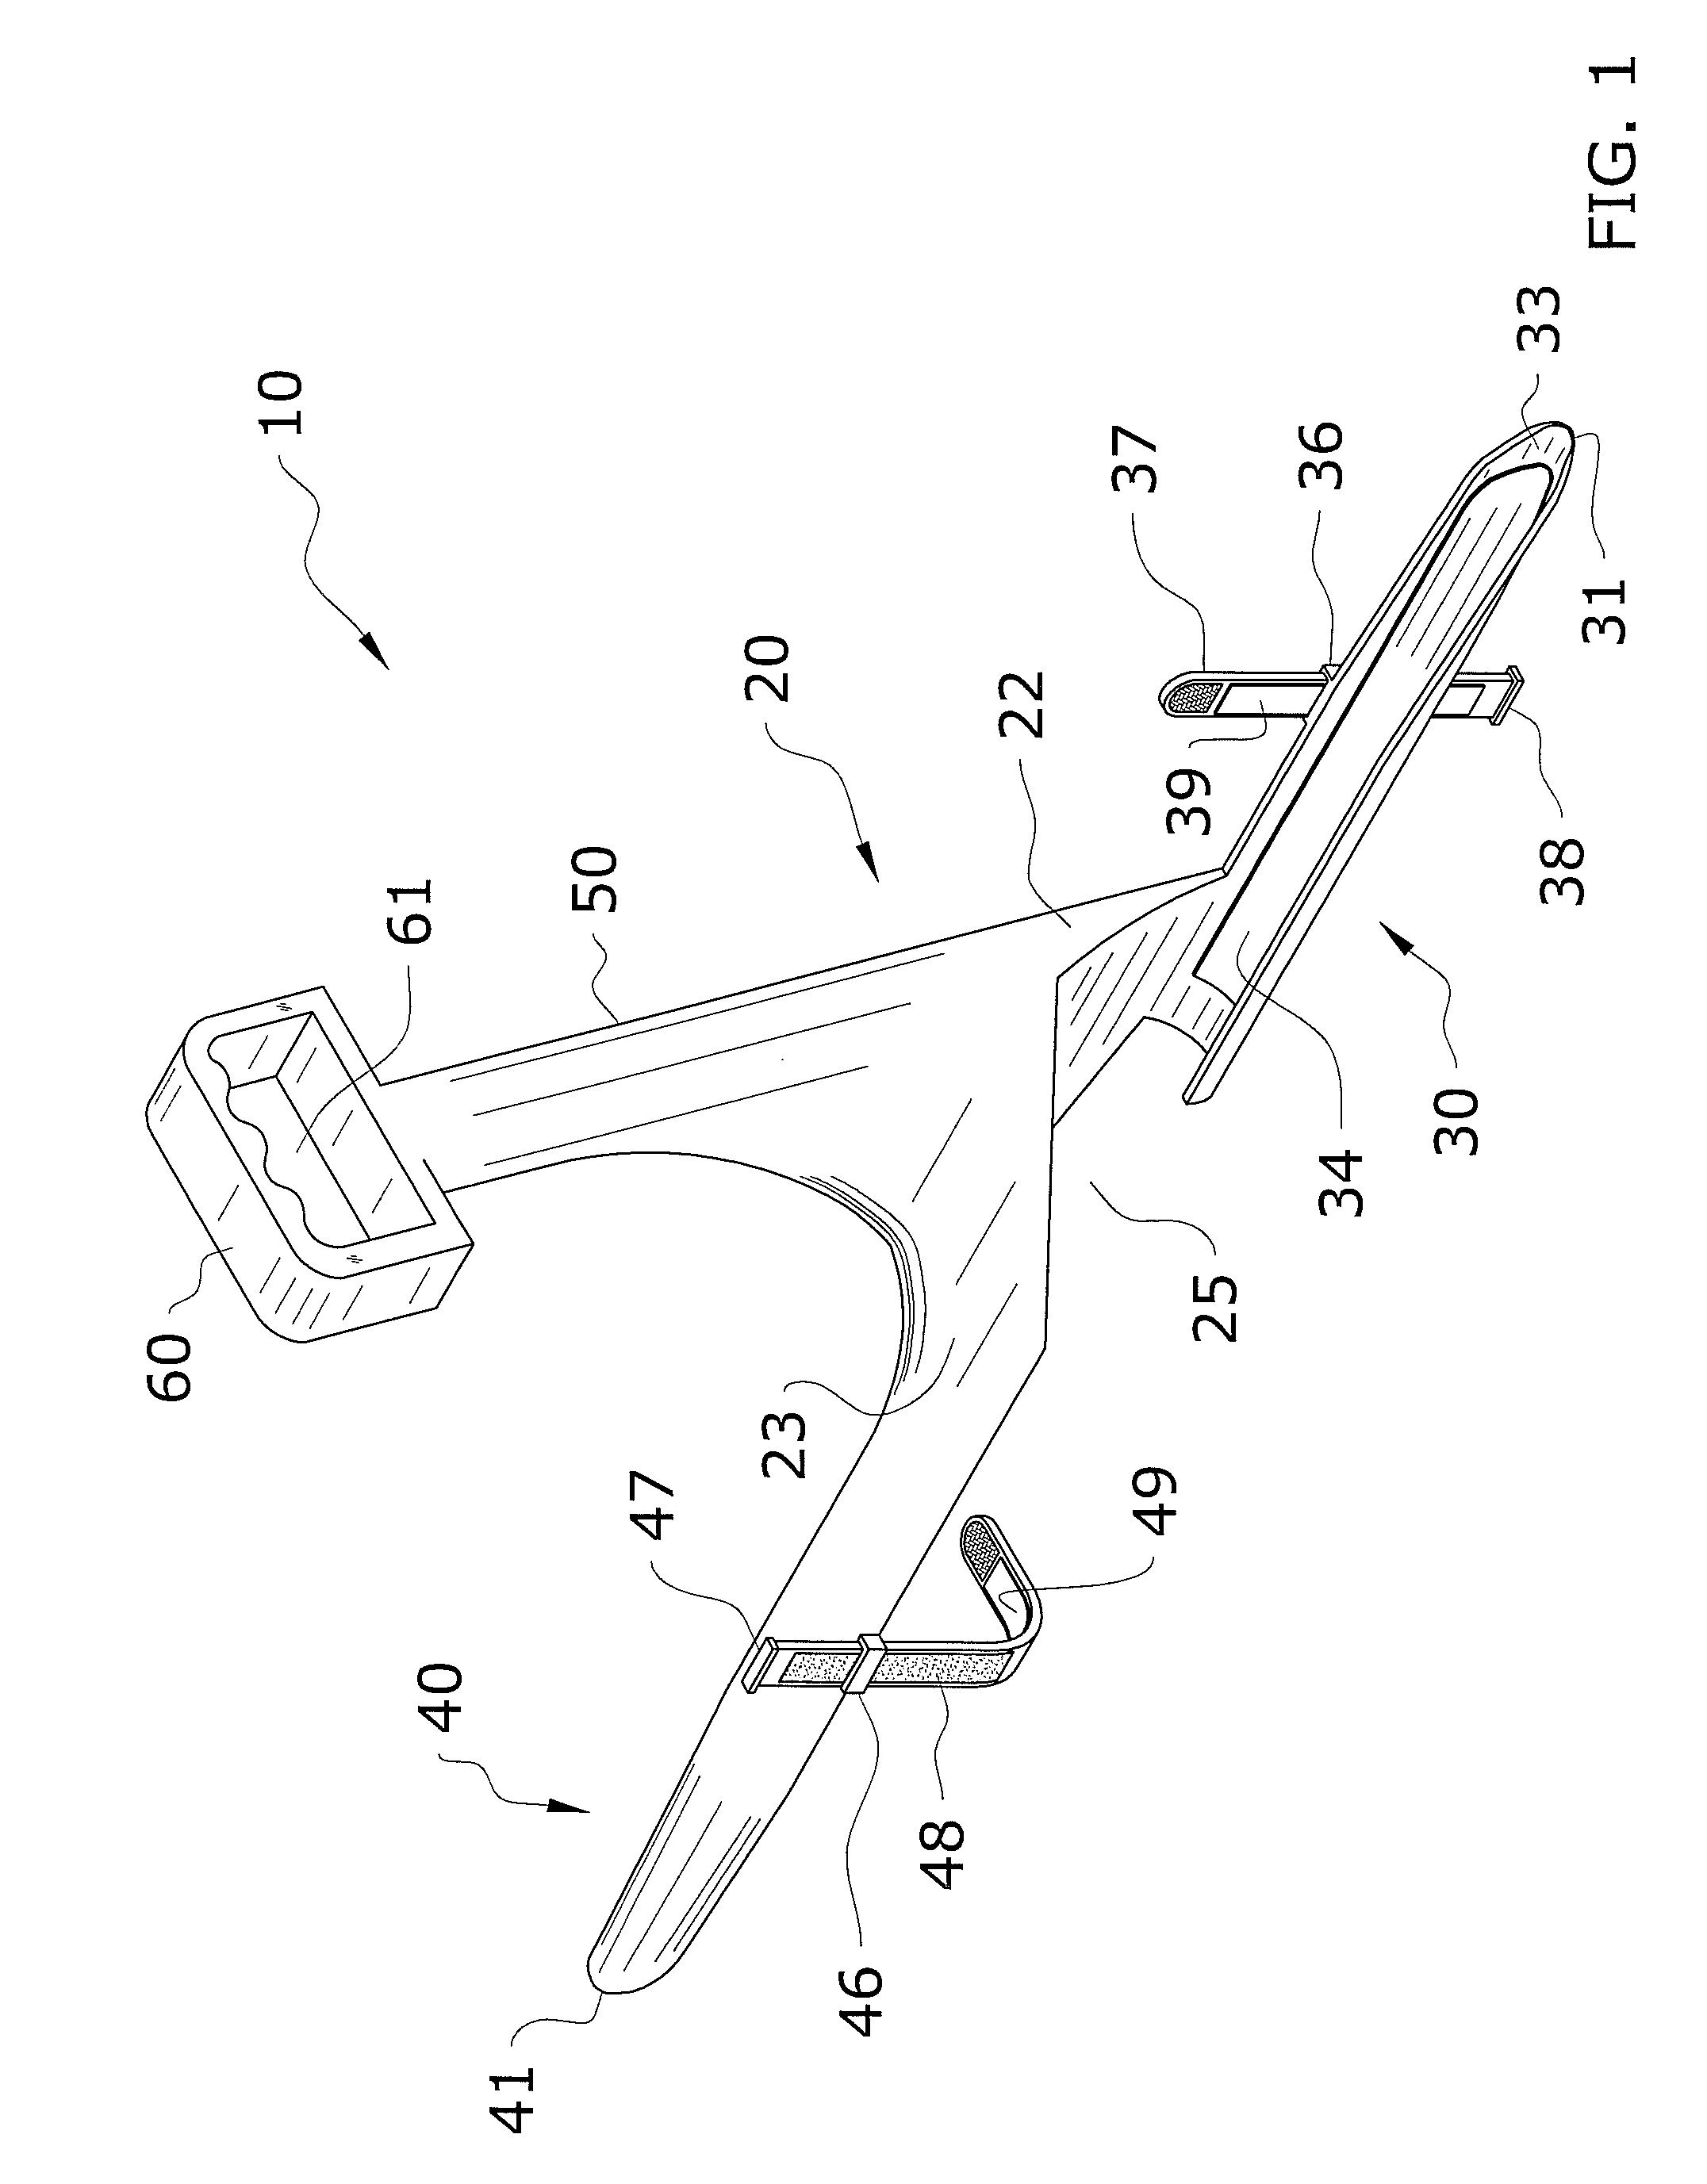 Auxiliary handle attachment for a tool